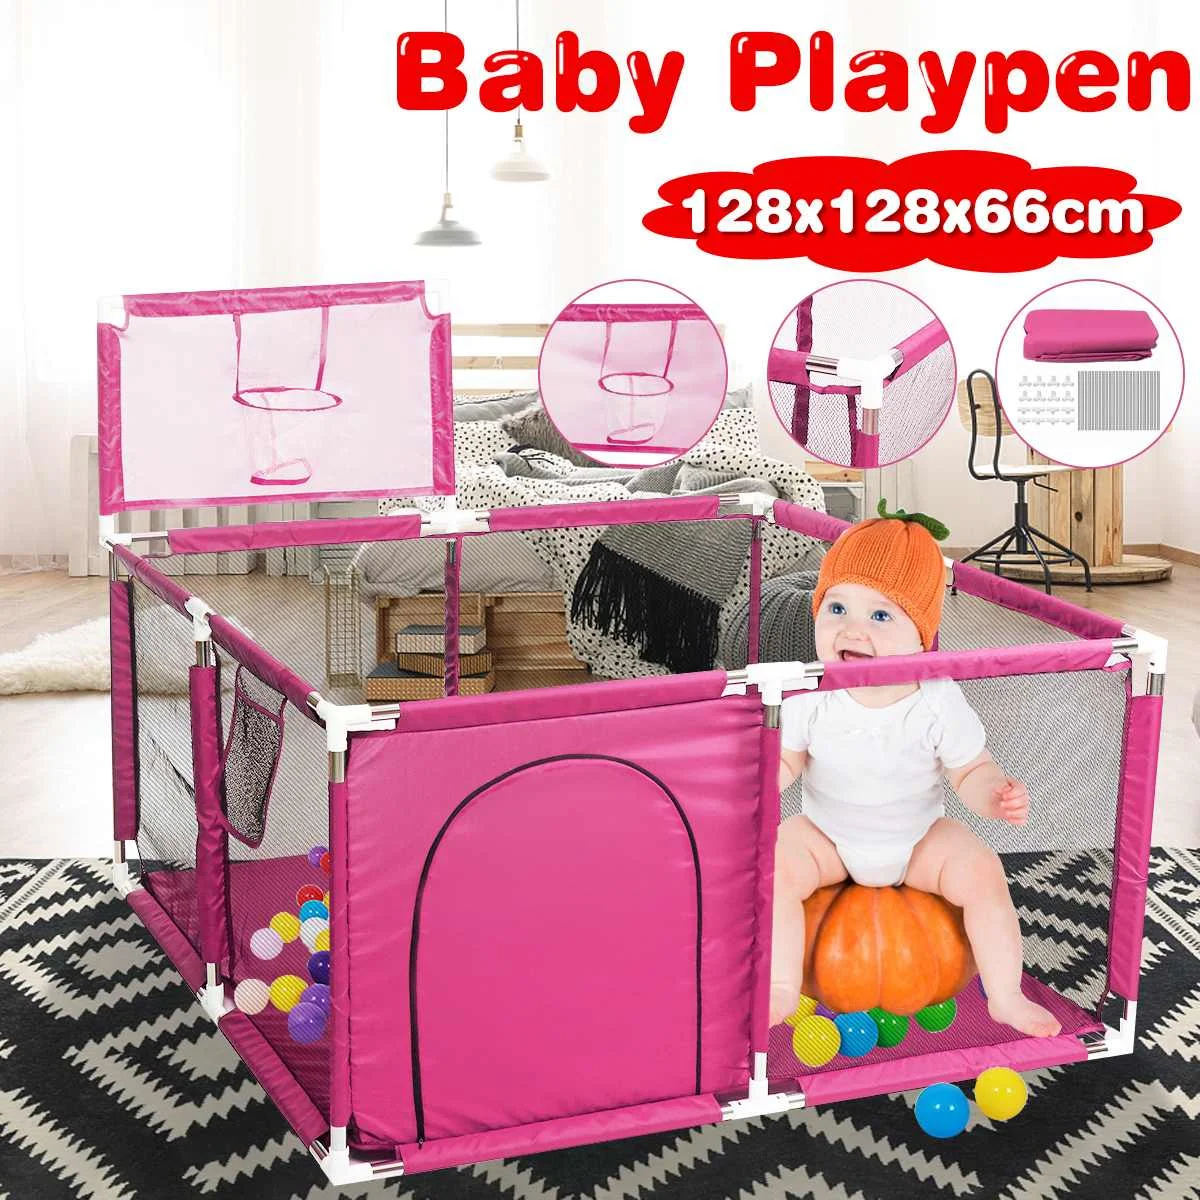 4 Panel Baby Playpen Kids Play Playard Safety Gate Fence With Basketball Rings Game Pool Barrier Baby Playpen Indoor Children